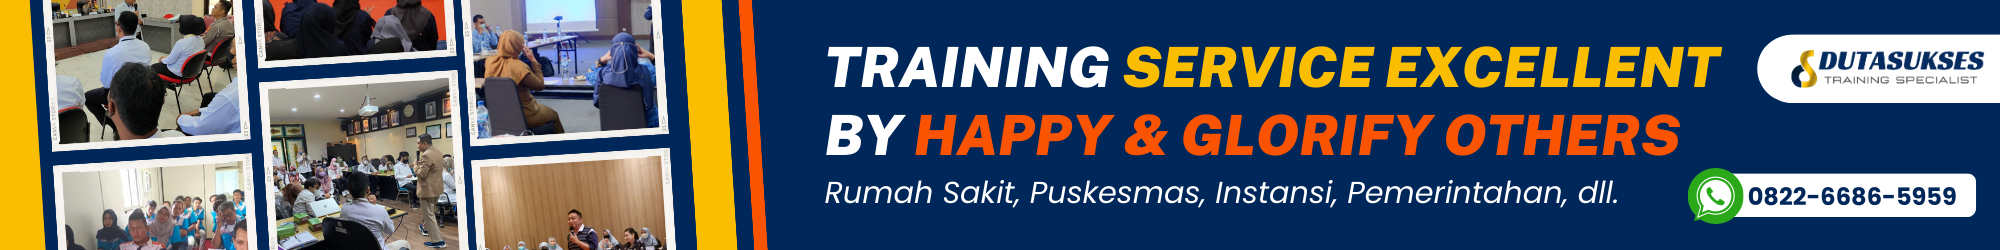 Training Service Excellent Instansi: By Happy & Glorify Others